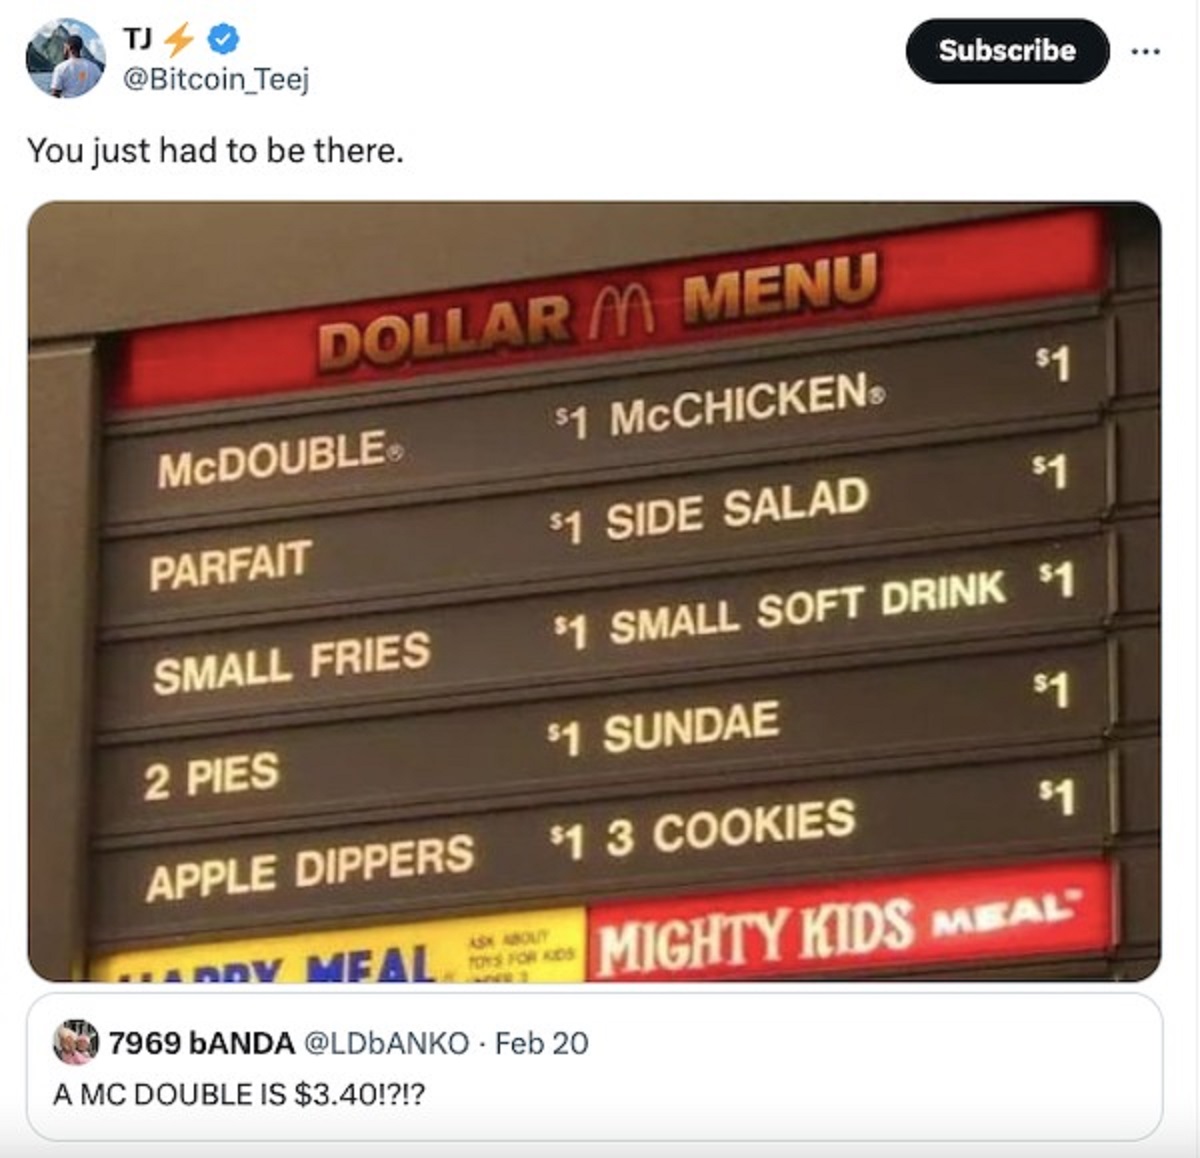 screenshot - TJ40> You just had to be there. Dollar M Menu Subscribe McDOUBLE $1 Mcchicken $1 Parfait $1 Side Salad $1 Small Fries $1 Small Soft Drink $1 2 Pies $1 Sundae $1 $1 3 Cookies $1 Apple Dippers Ask About Addy Meal To For Kids 7969 bANDA Feb 20 A